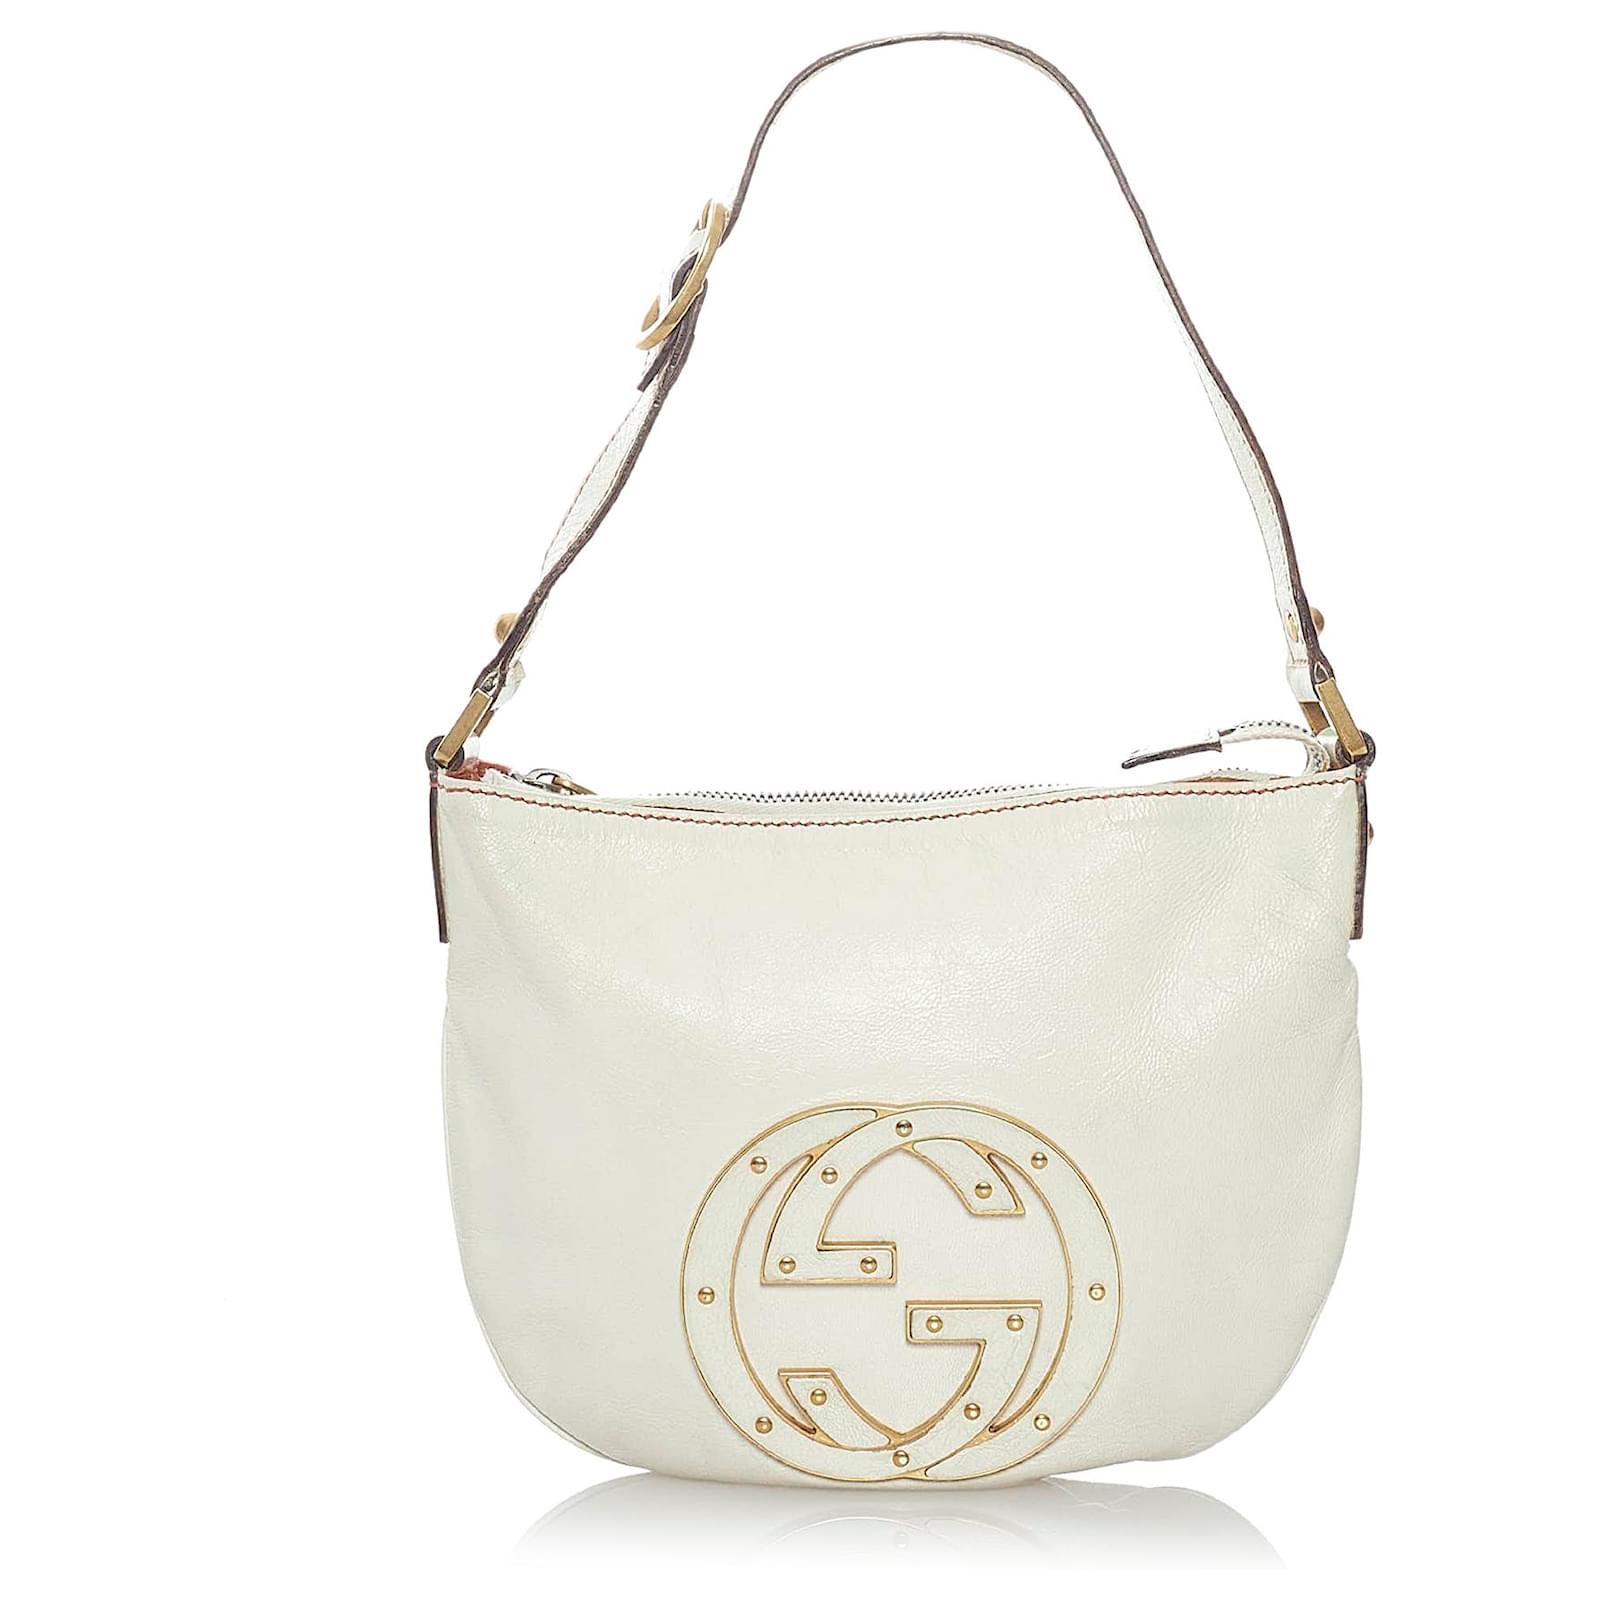 Gucci Blondie mini shoulder bag in White Leather